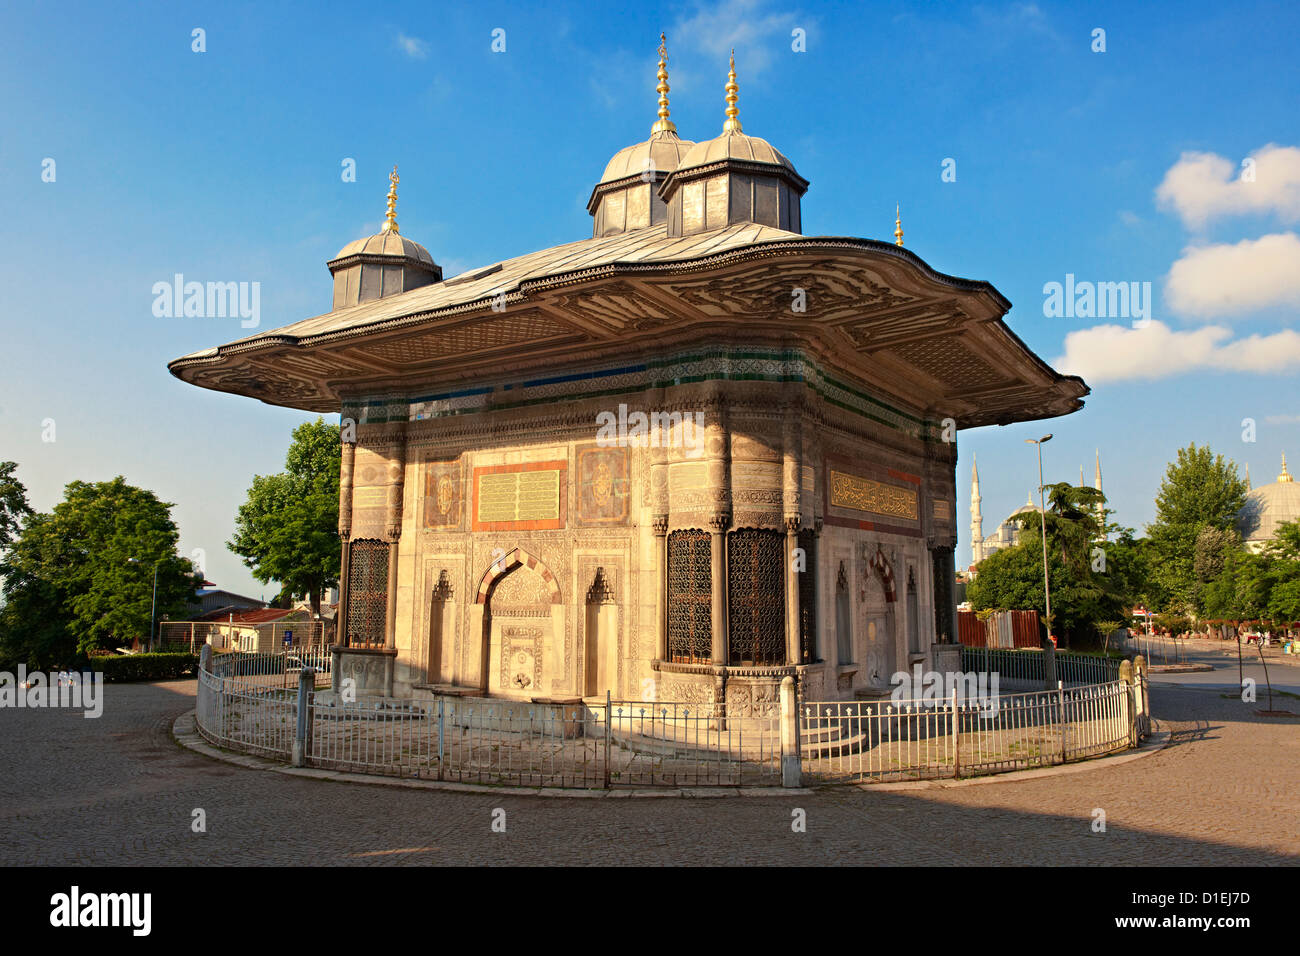 The Fountain of Sultan Ahmed III a rococo structure built in 1728 , Istanbul Stock Photo